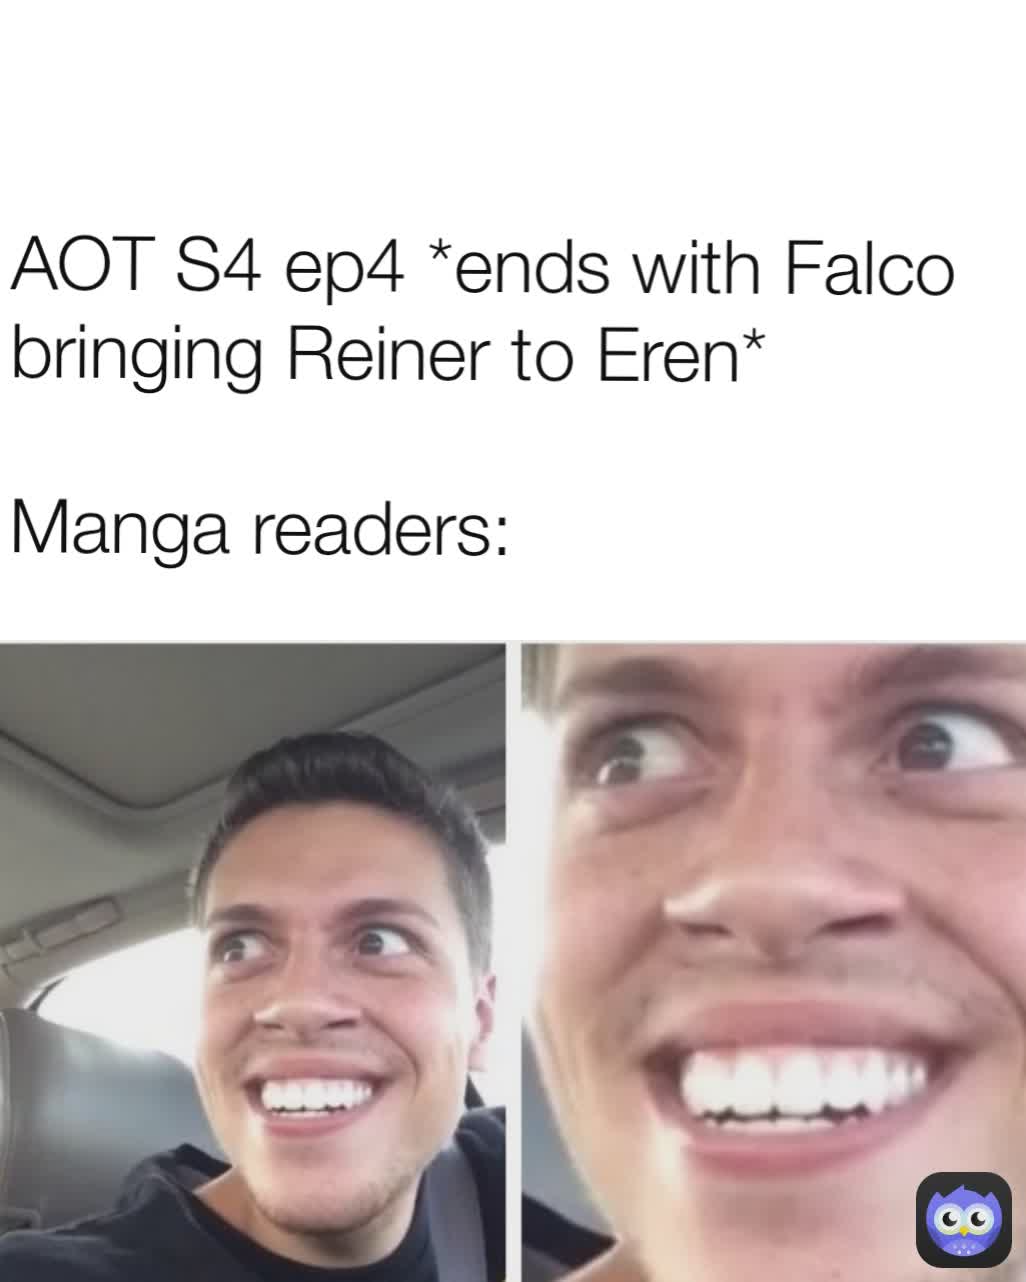 AOT S4 ep4 *ends with Falco bringing Reiner to Eren*

Manga readers: